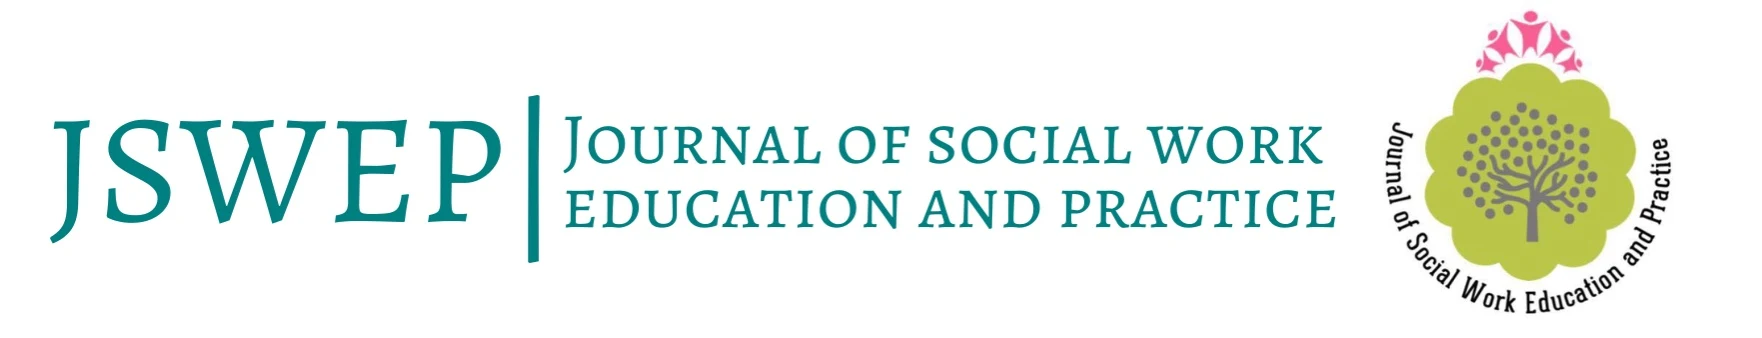 Journal of Social Work Education and Practice